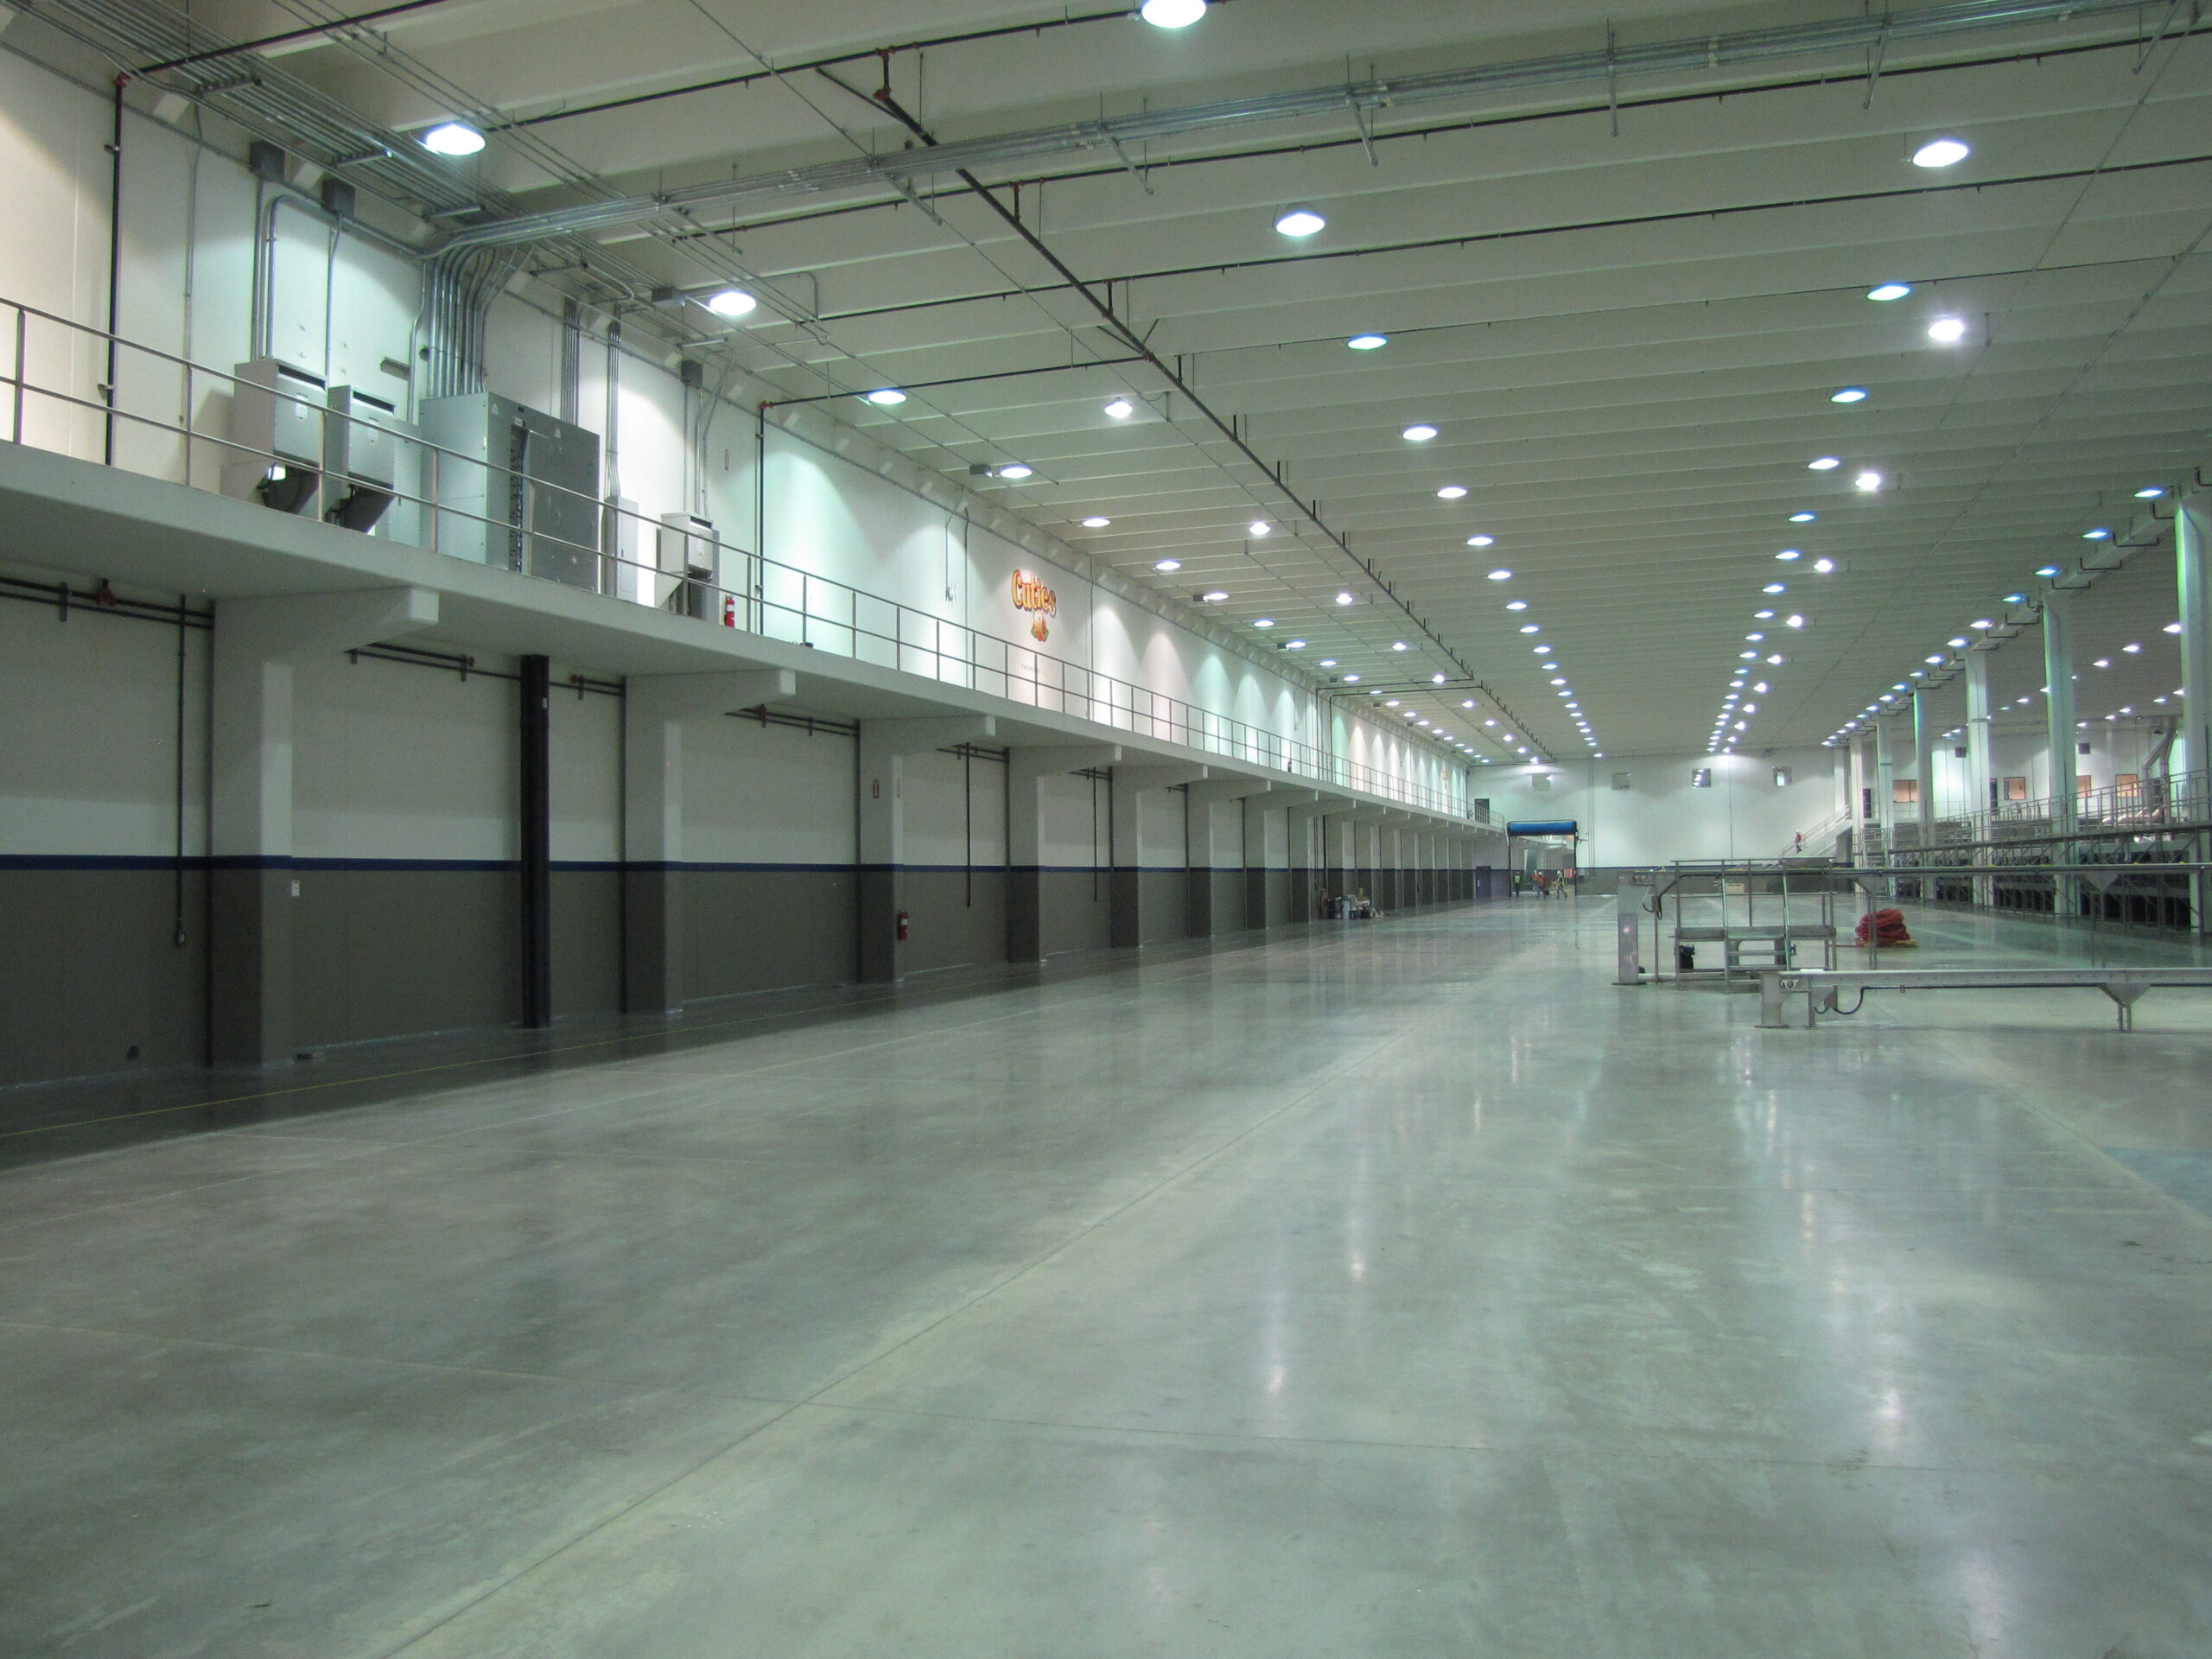 Inside view of Warehouse